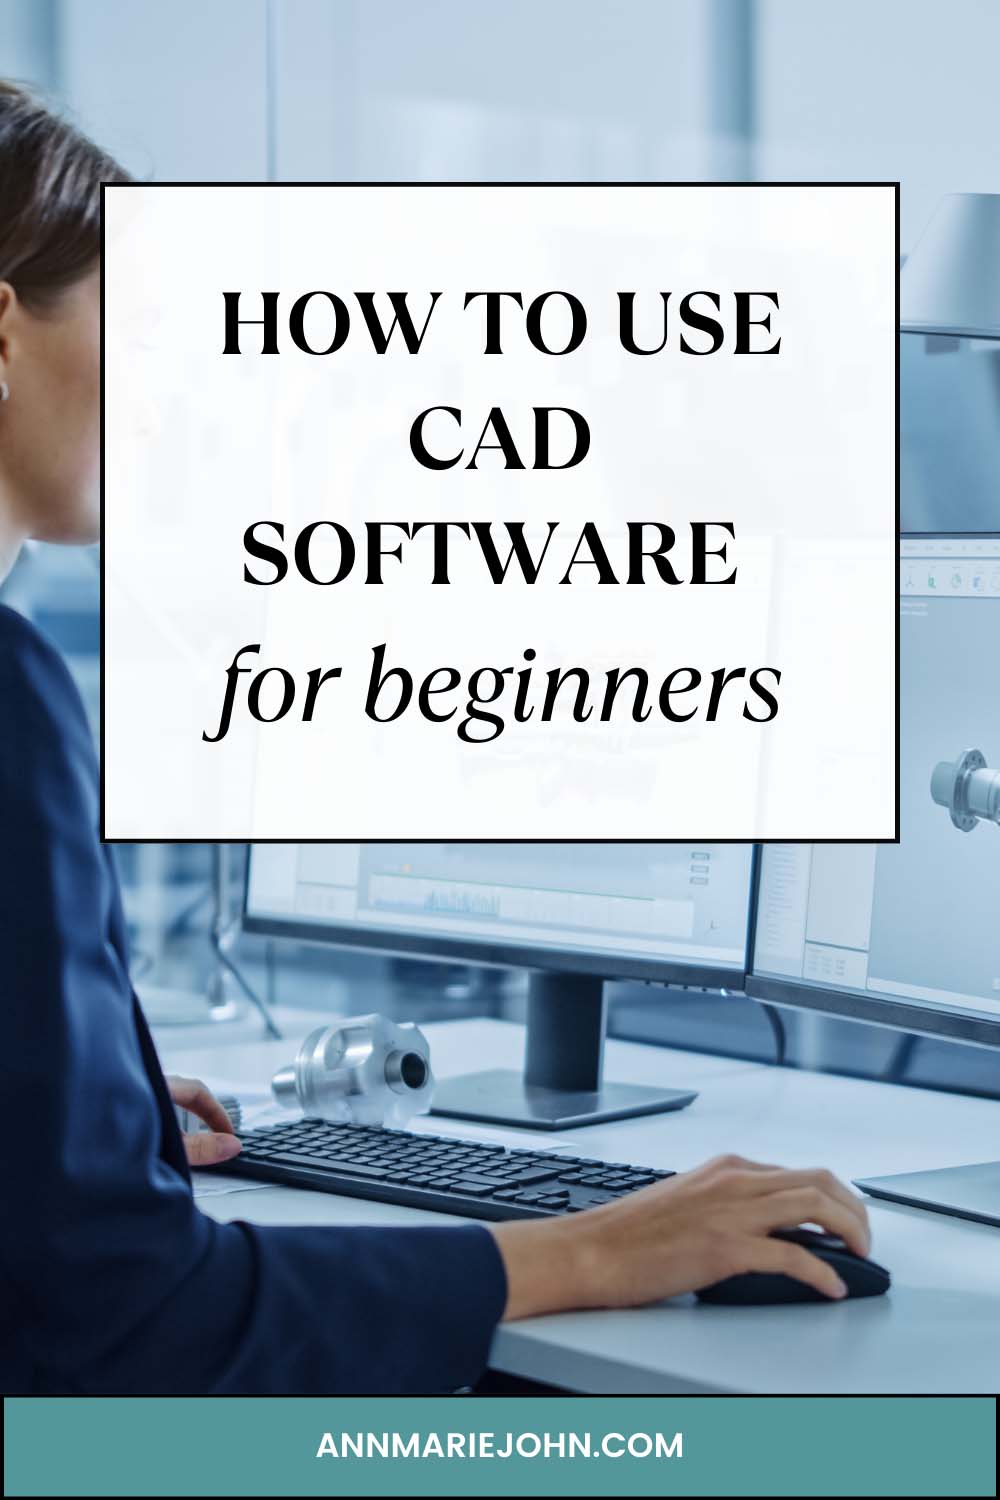 How To Use CAD Software